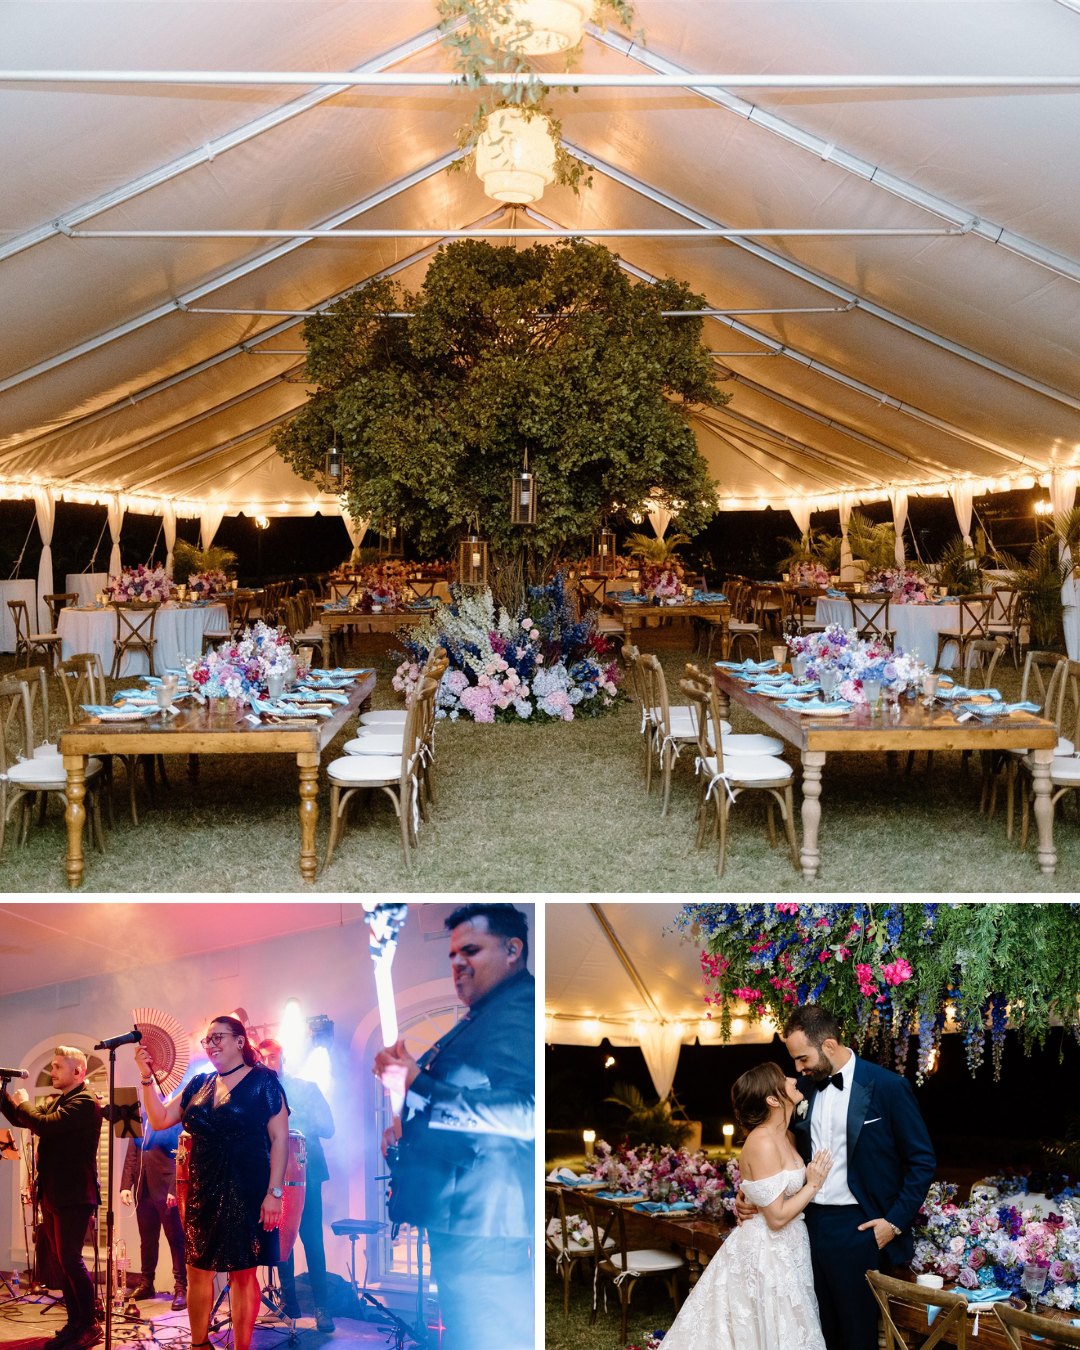 A collage featuring an outdoor tent reception, a wedding band and a bride and groom dancing.